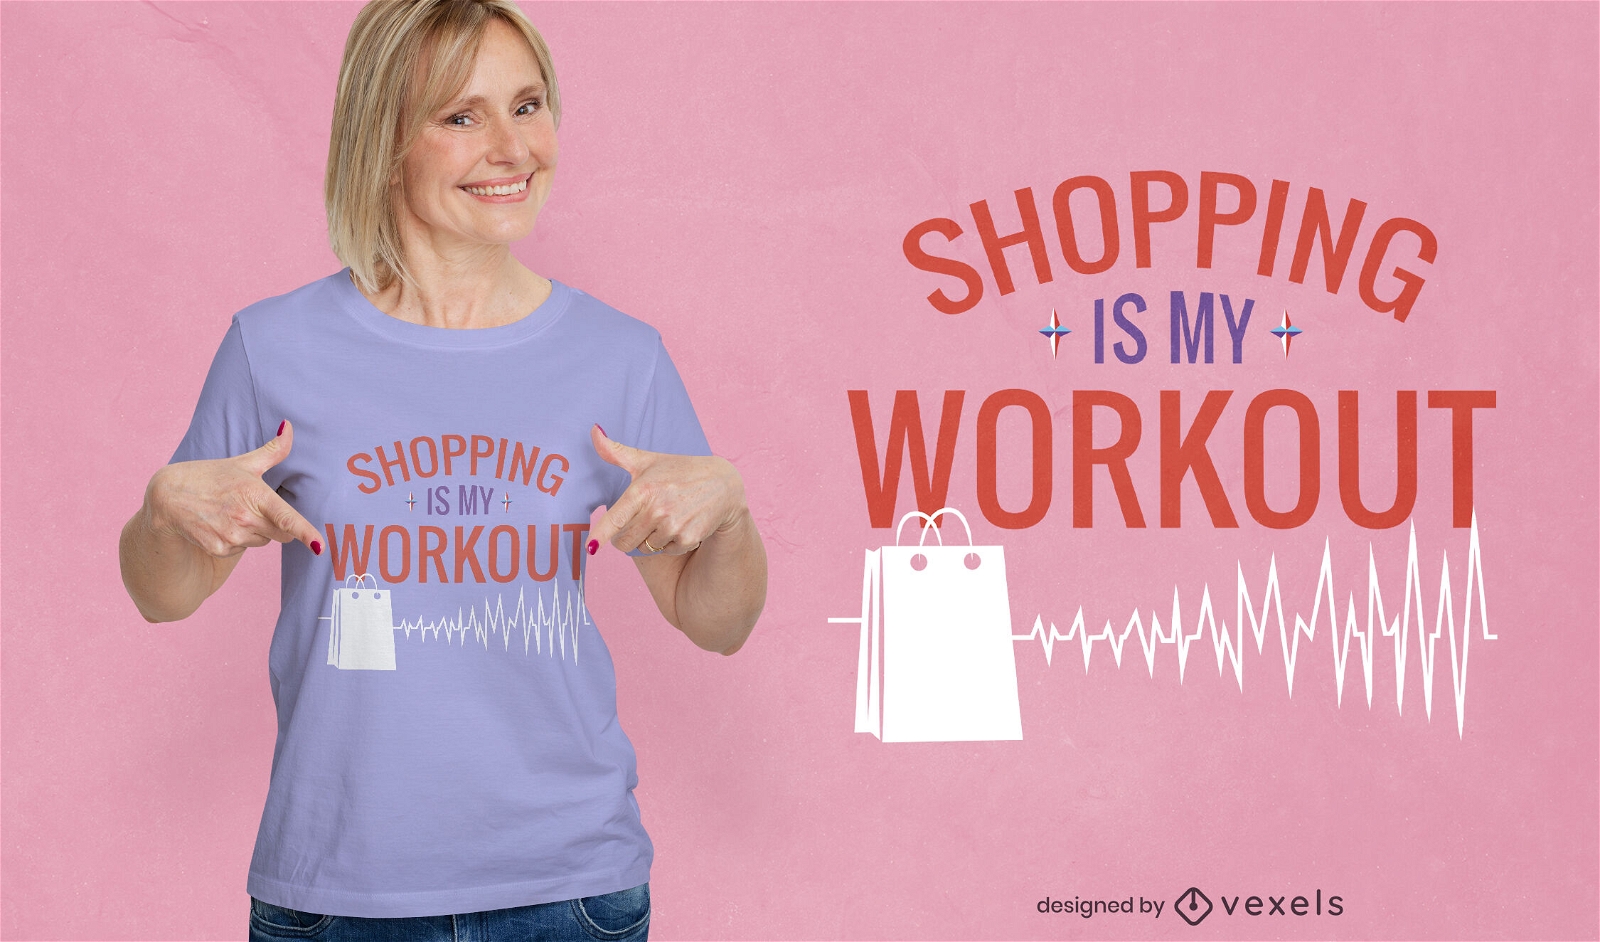 Funny shopping workout quote t-shirt design